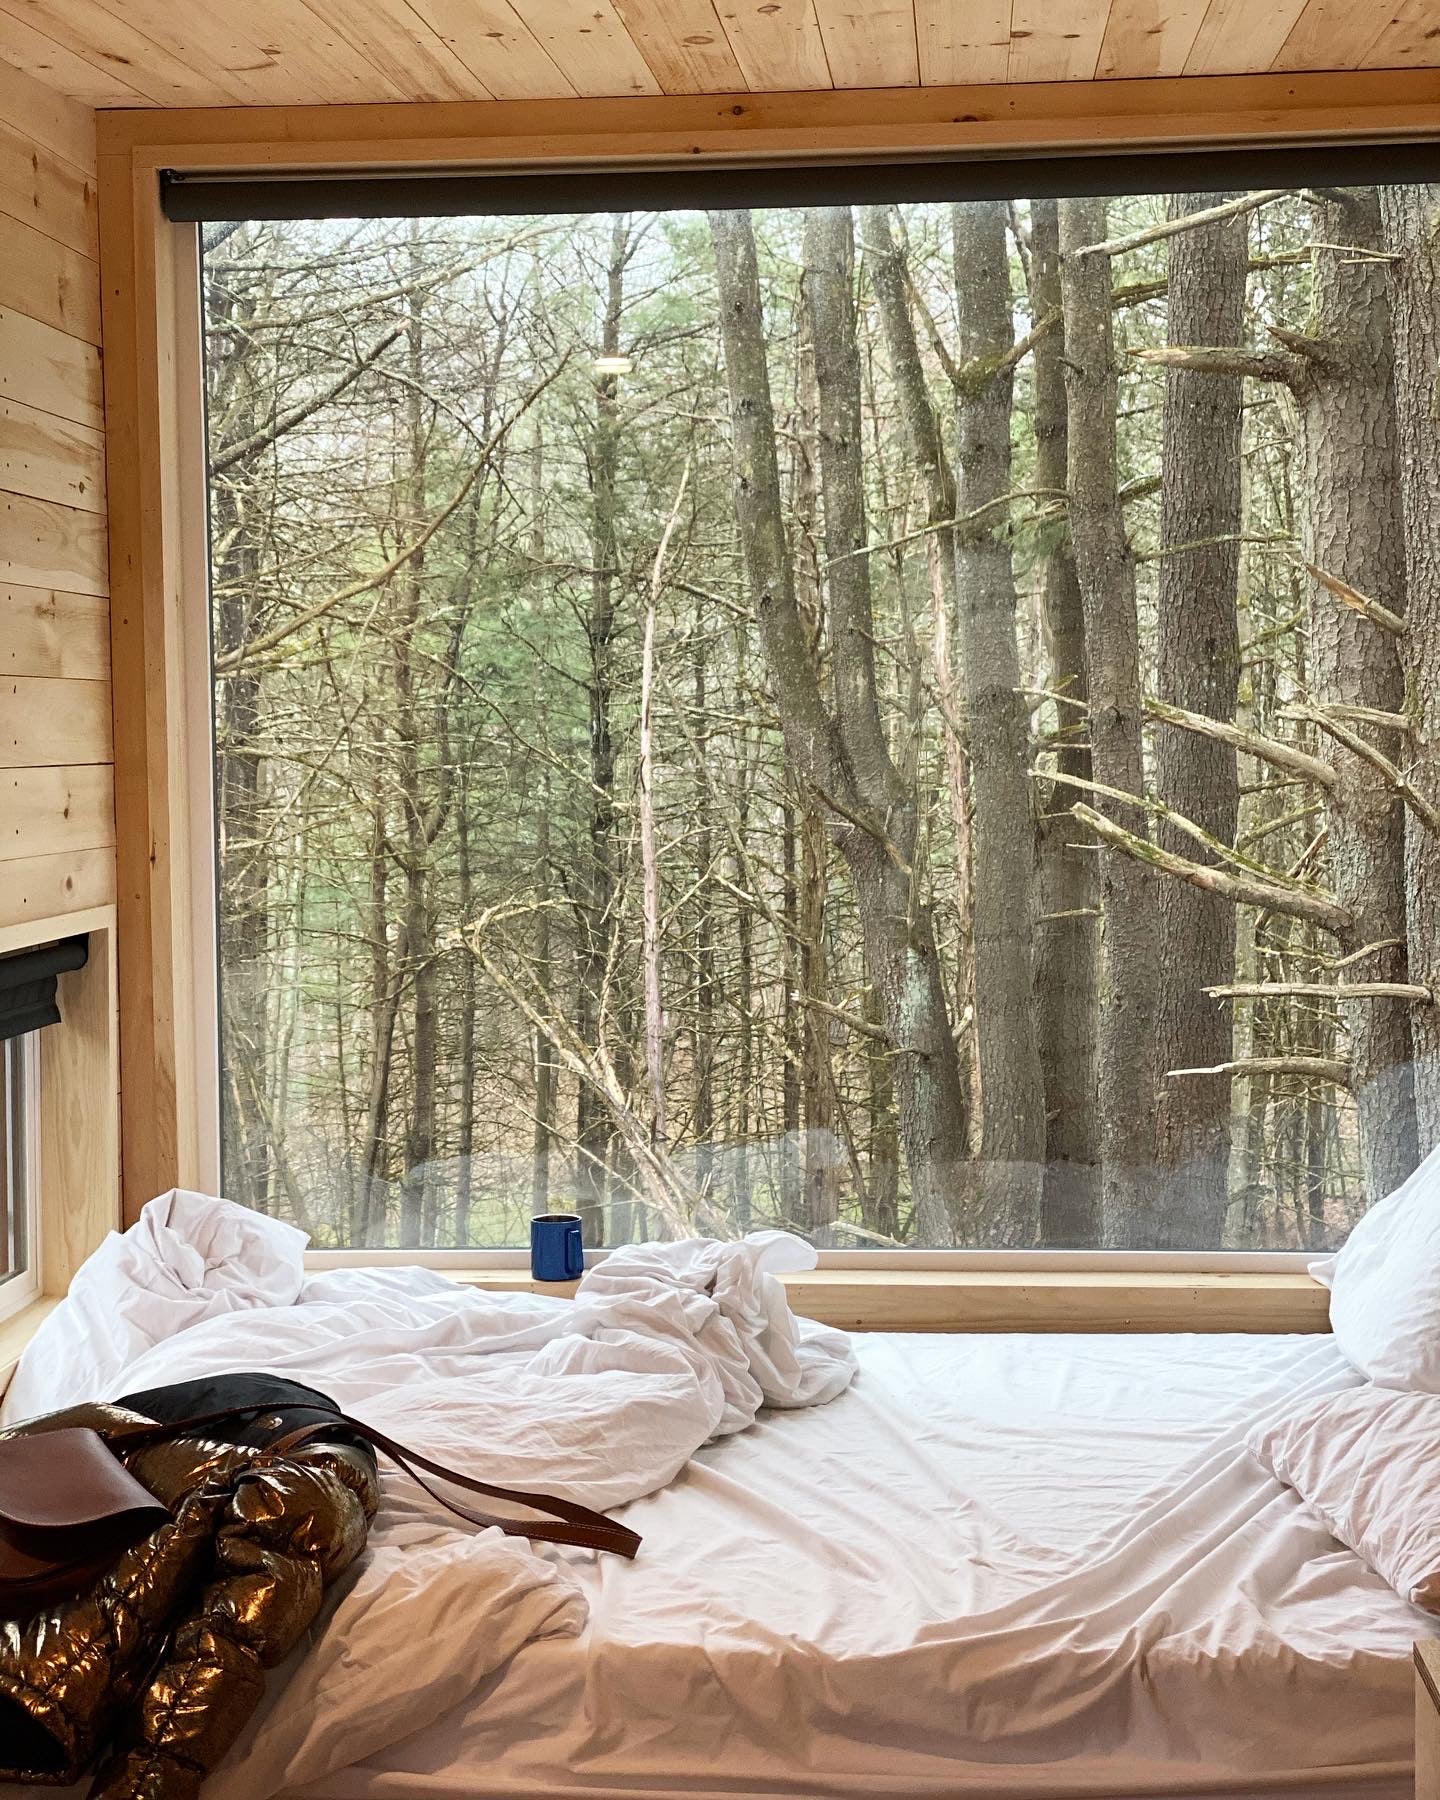 After Eight Weeks Cramped Inside An Apartment, I Escaped To The Catskills